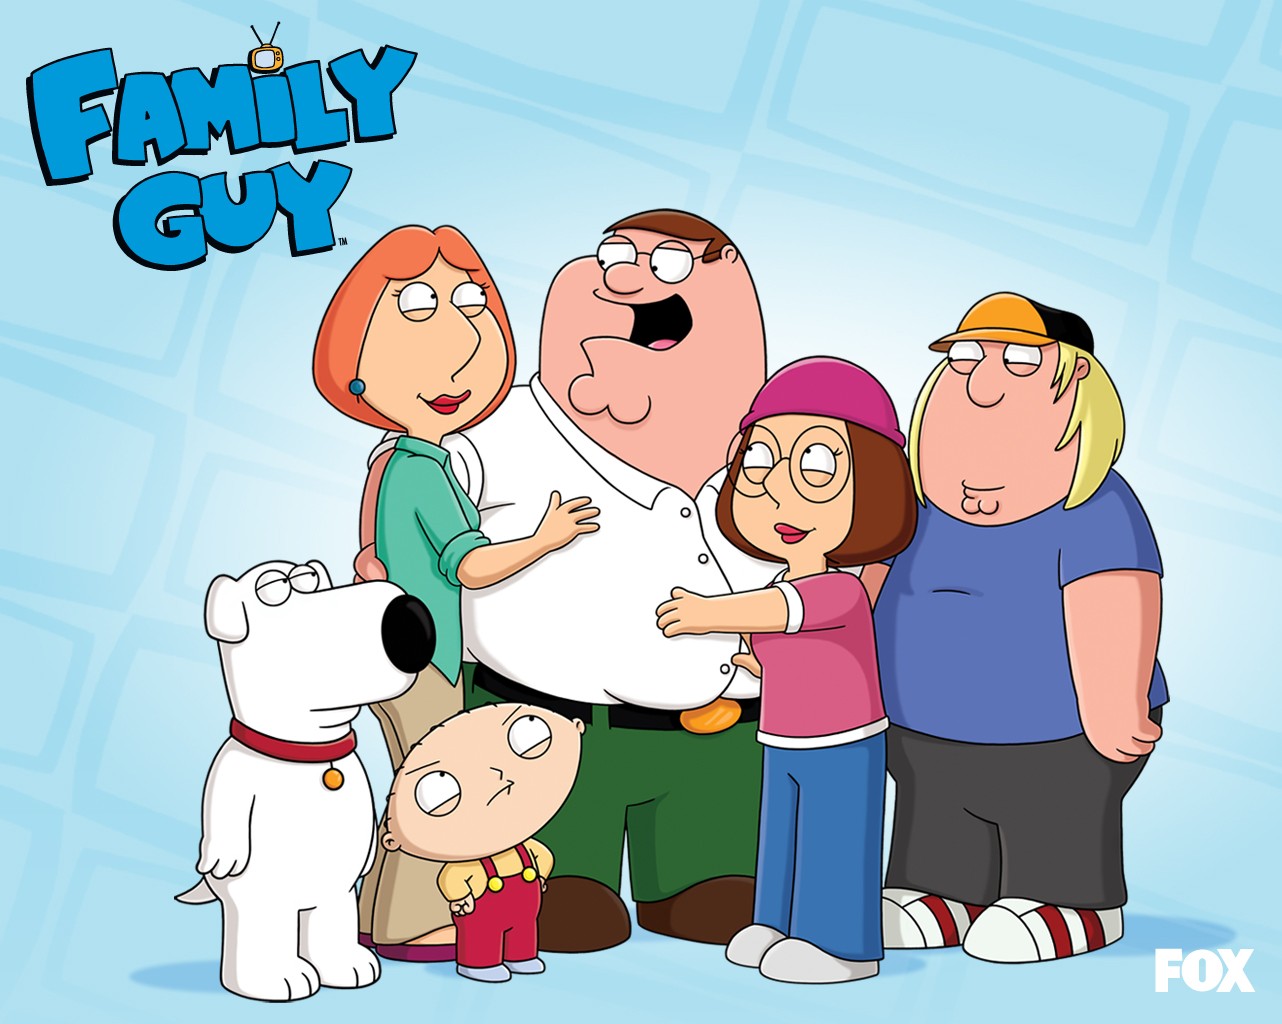 peter griffin, tv show, family guy, brian griffin, chris griffin, lois griffin, meg griffin, stewie griffin Full HD